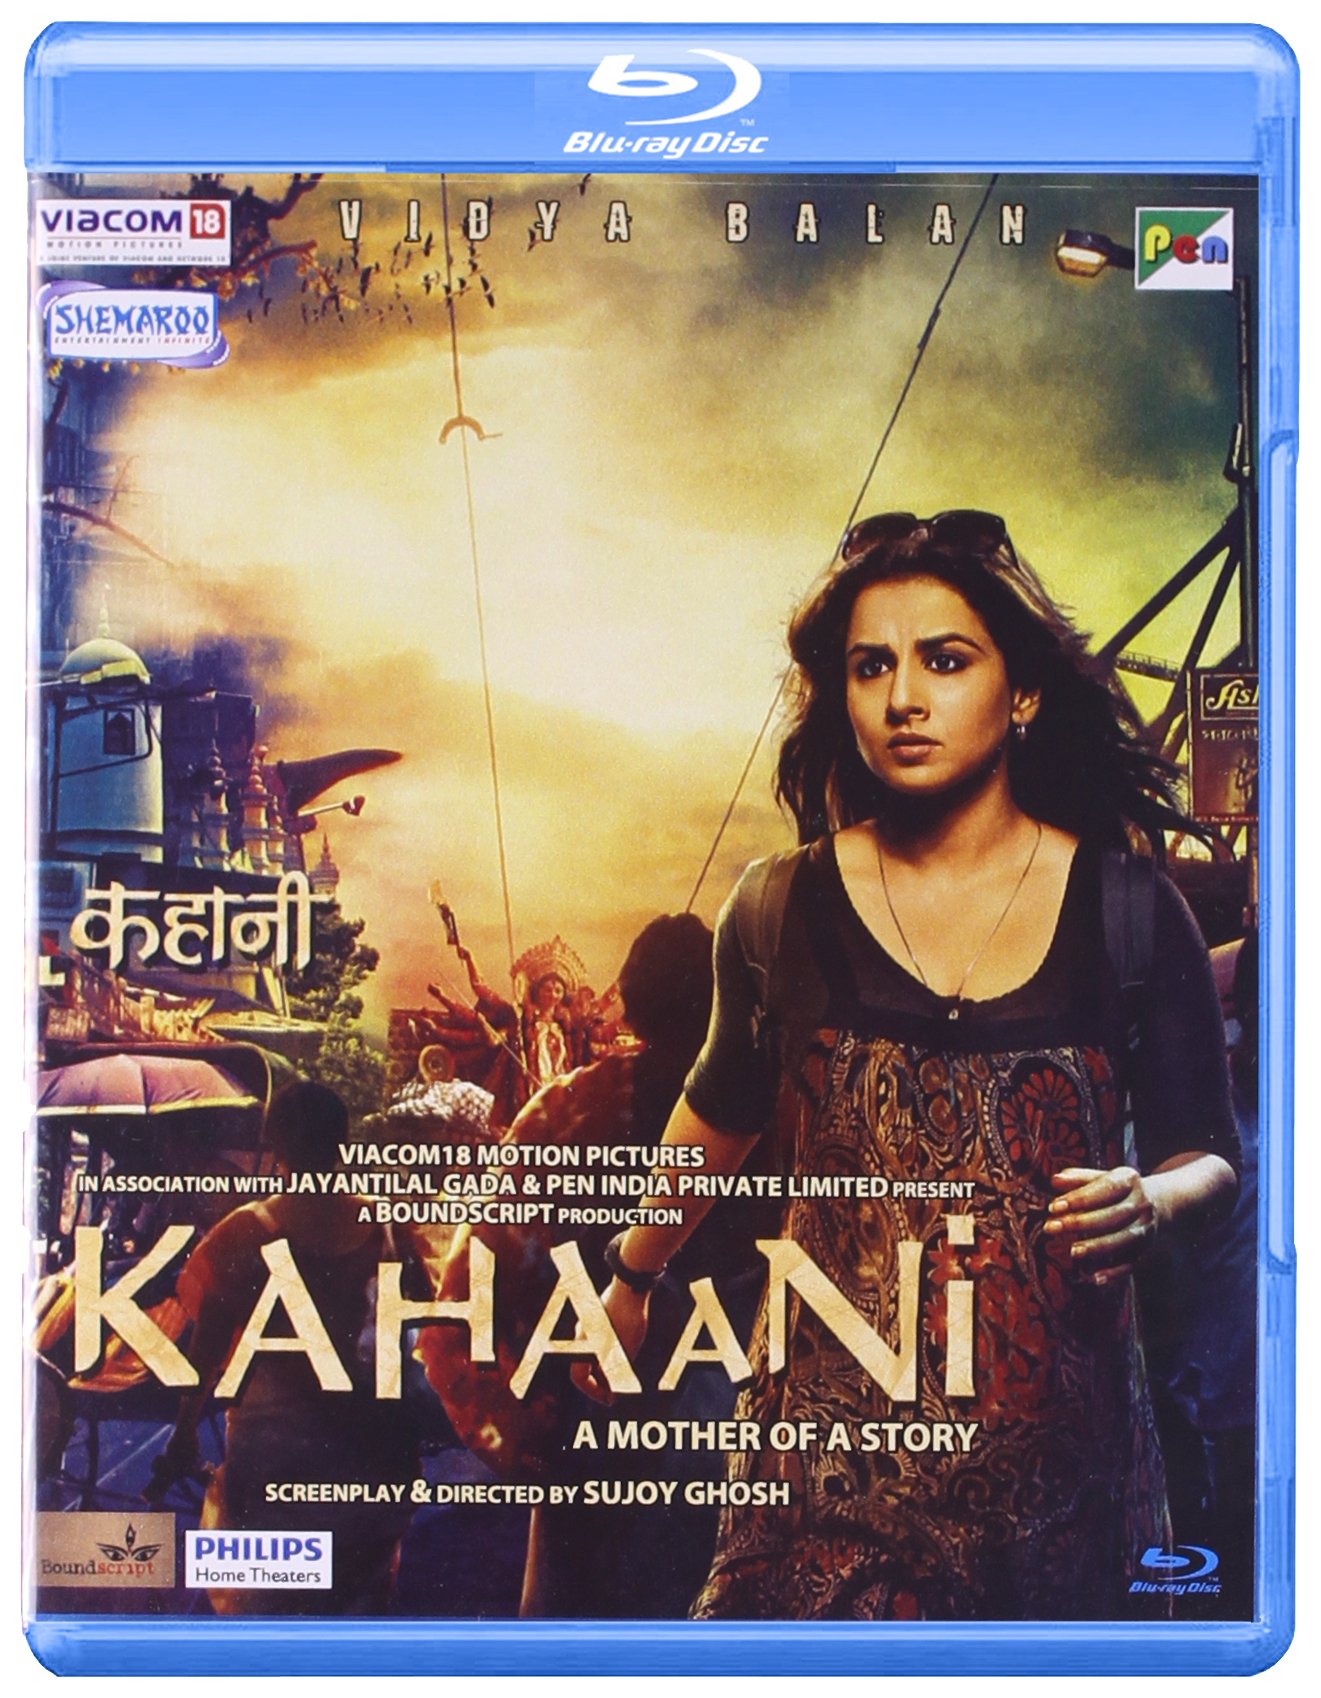 kahaani-movie-purchase-or-watch-online